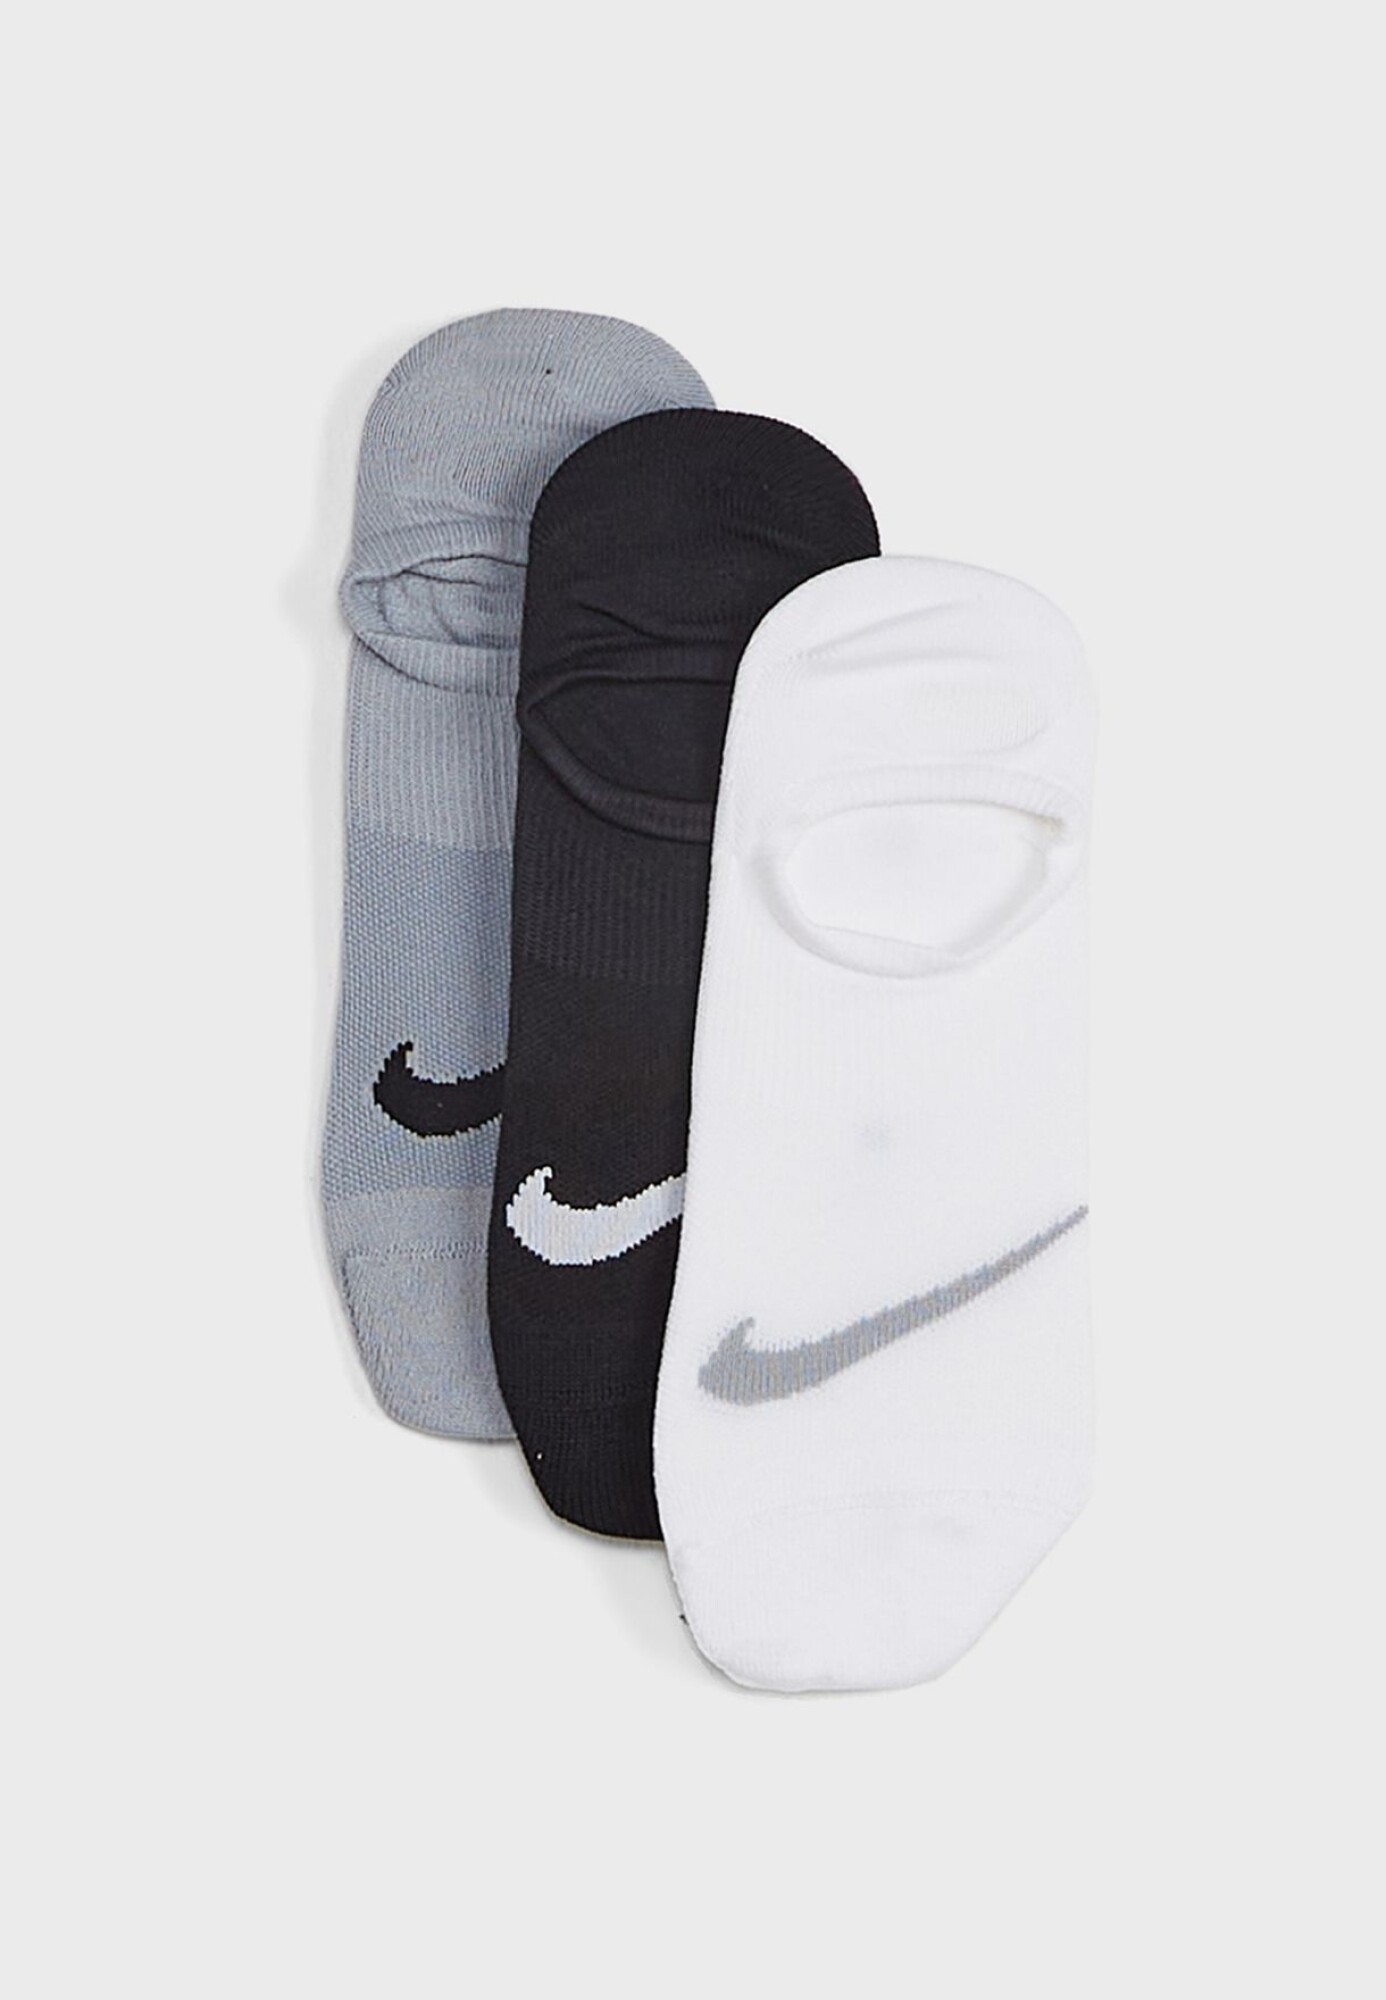 Everyday Plus 3 Pack - Medias Nike Invisible Everyday Plus Lightweight 3 Pack La Cancha